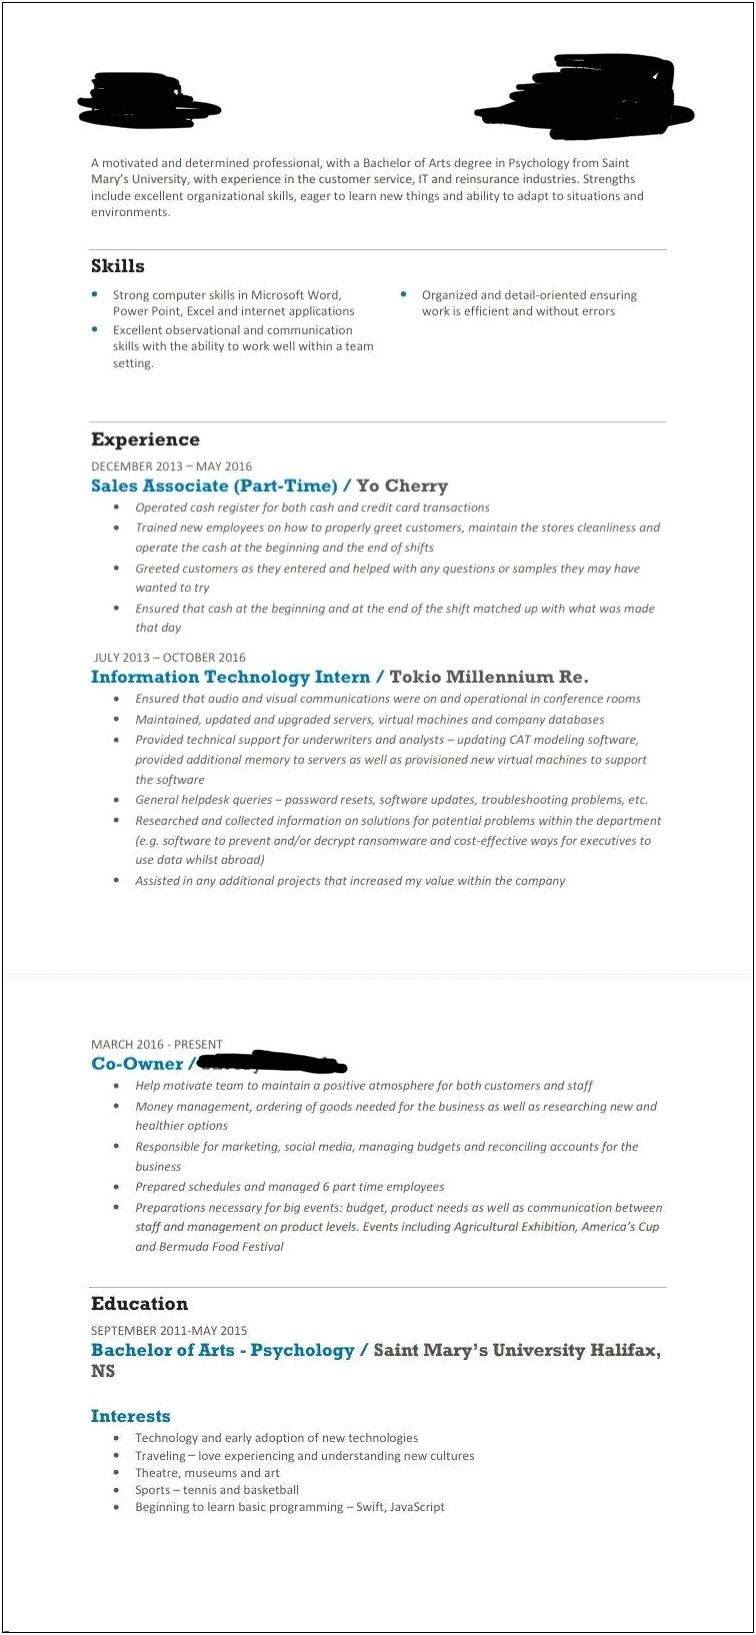 Does Working At Restaurant Count On Resume Reddit